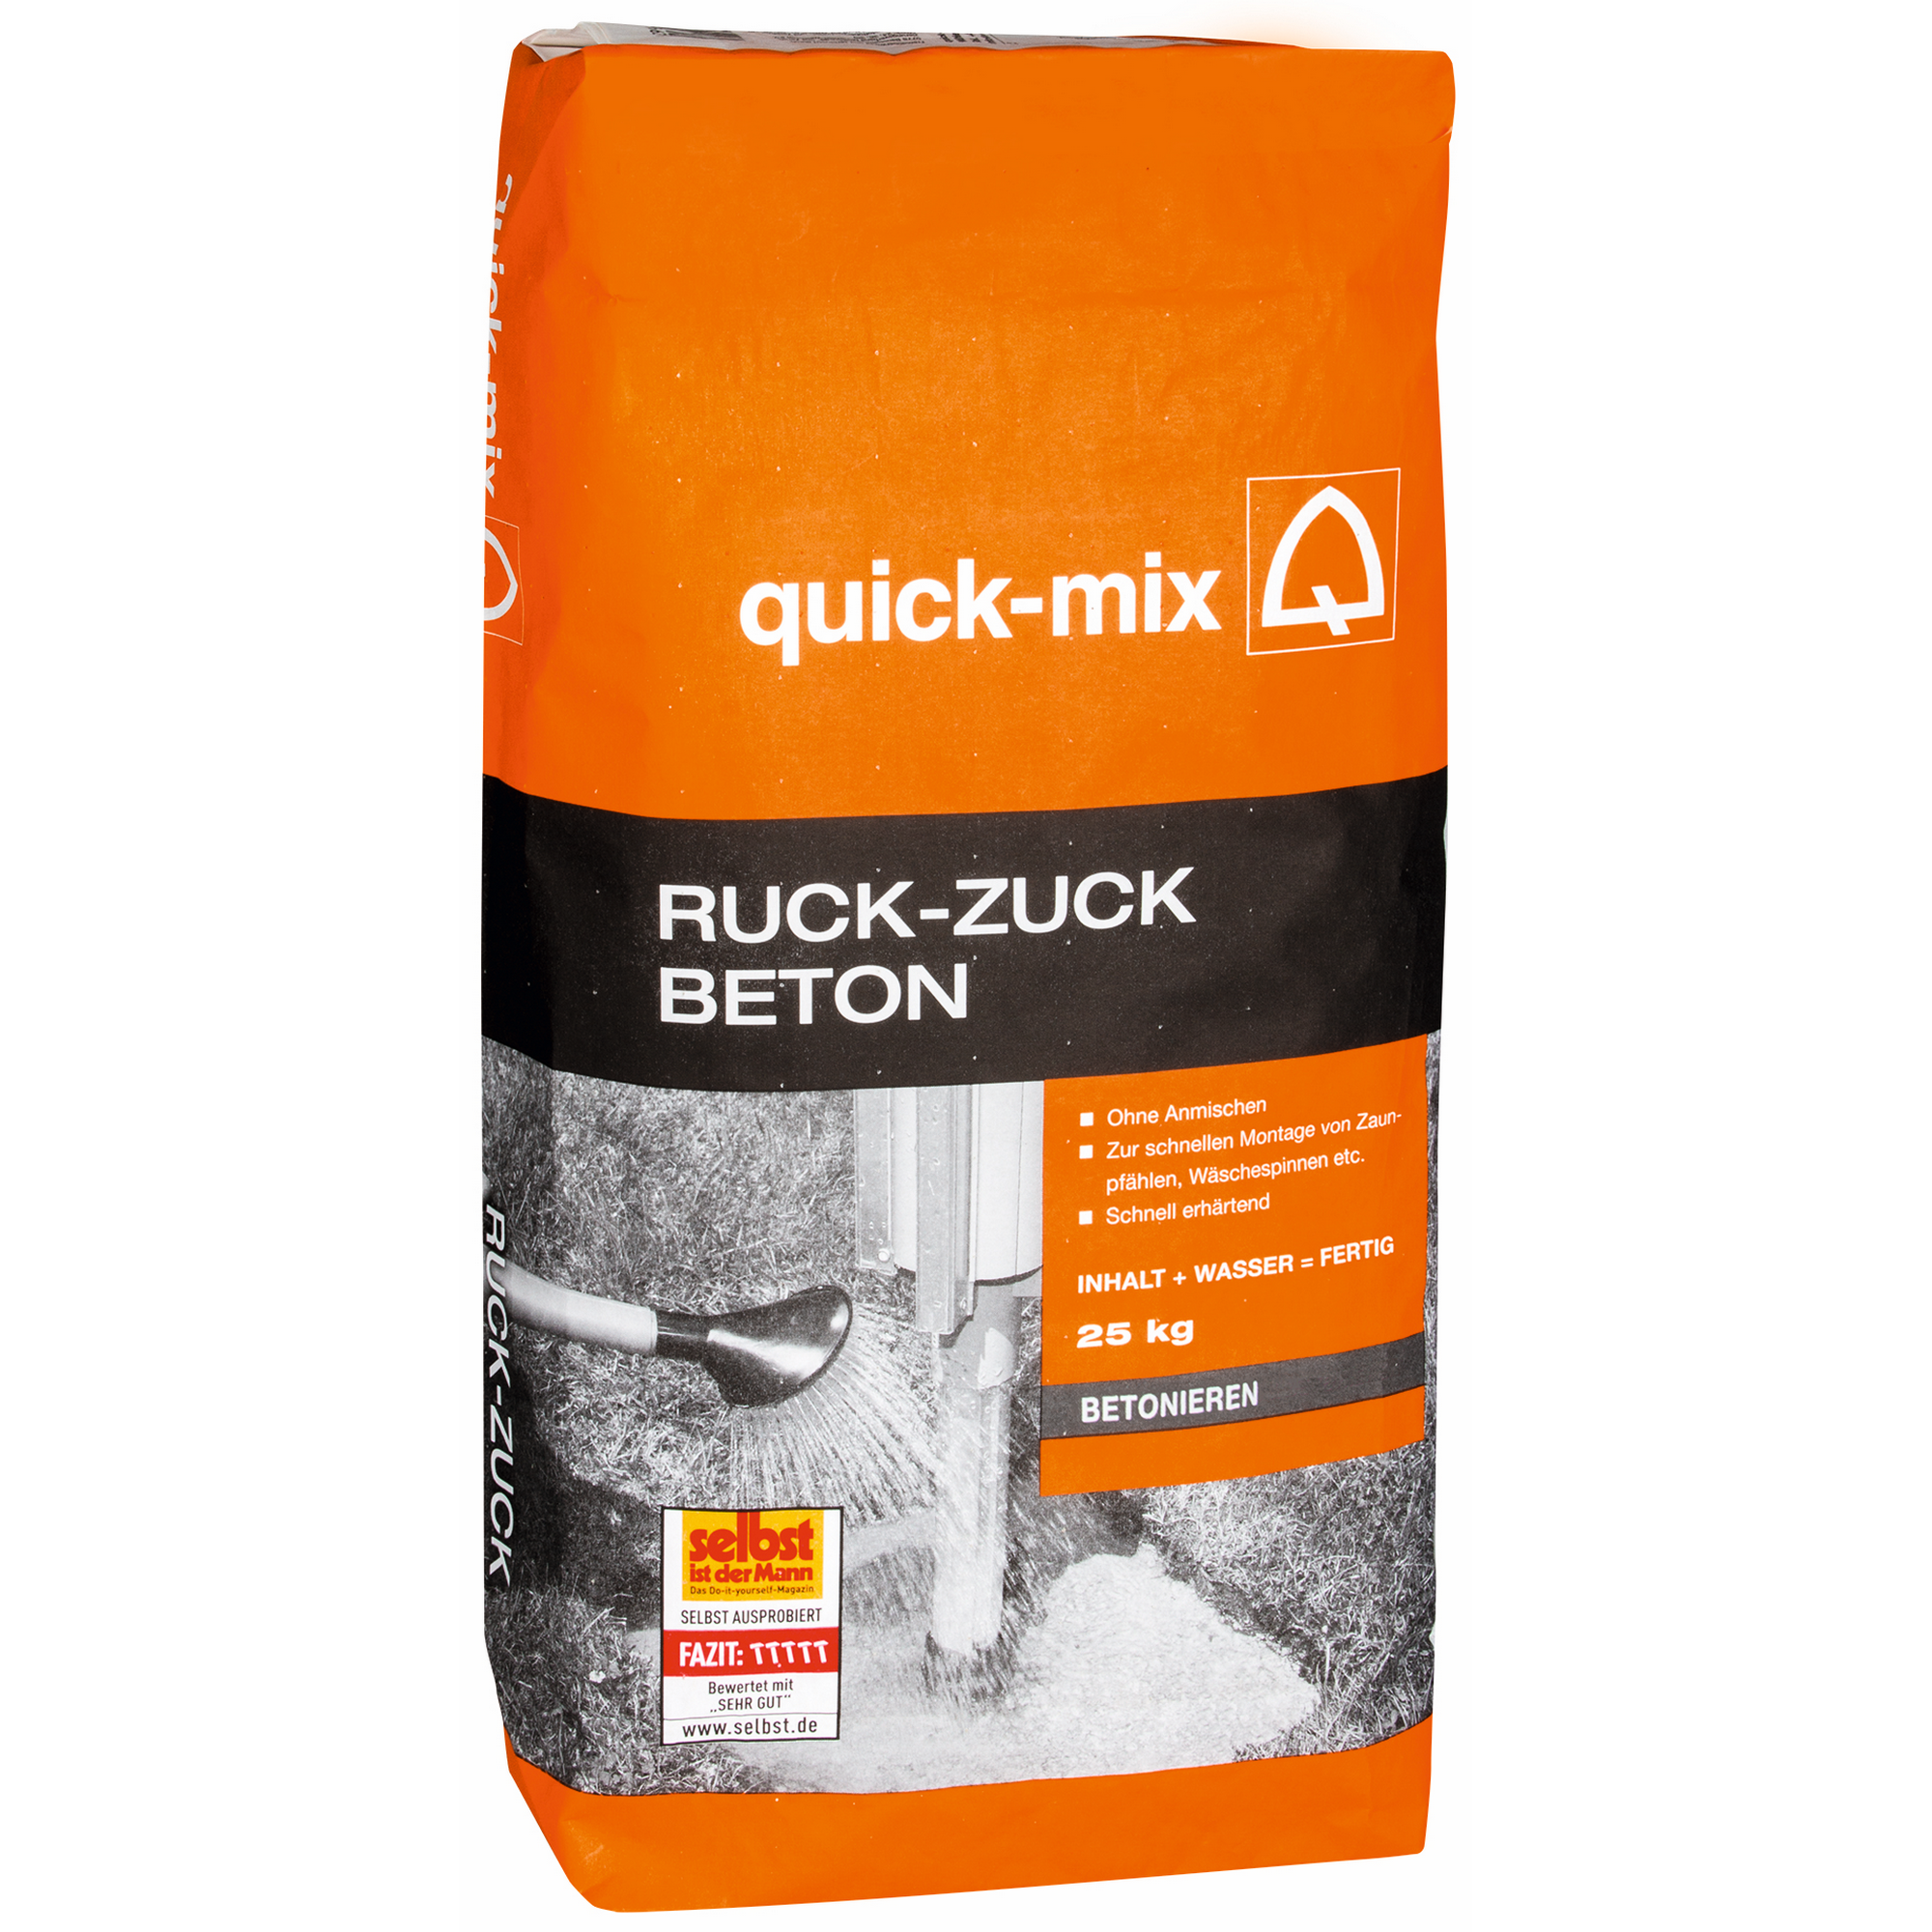 Beton 'Ruck-Zuck' 25 kg + product picture